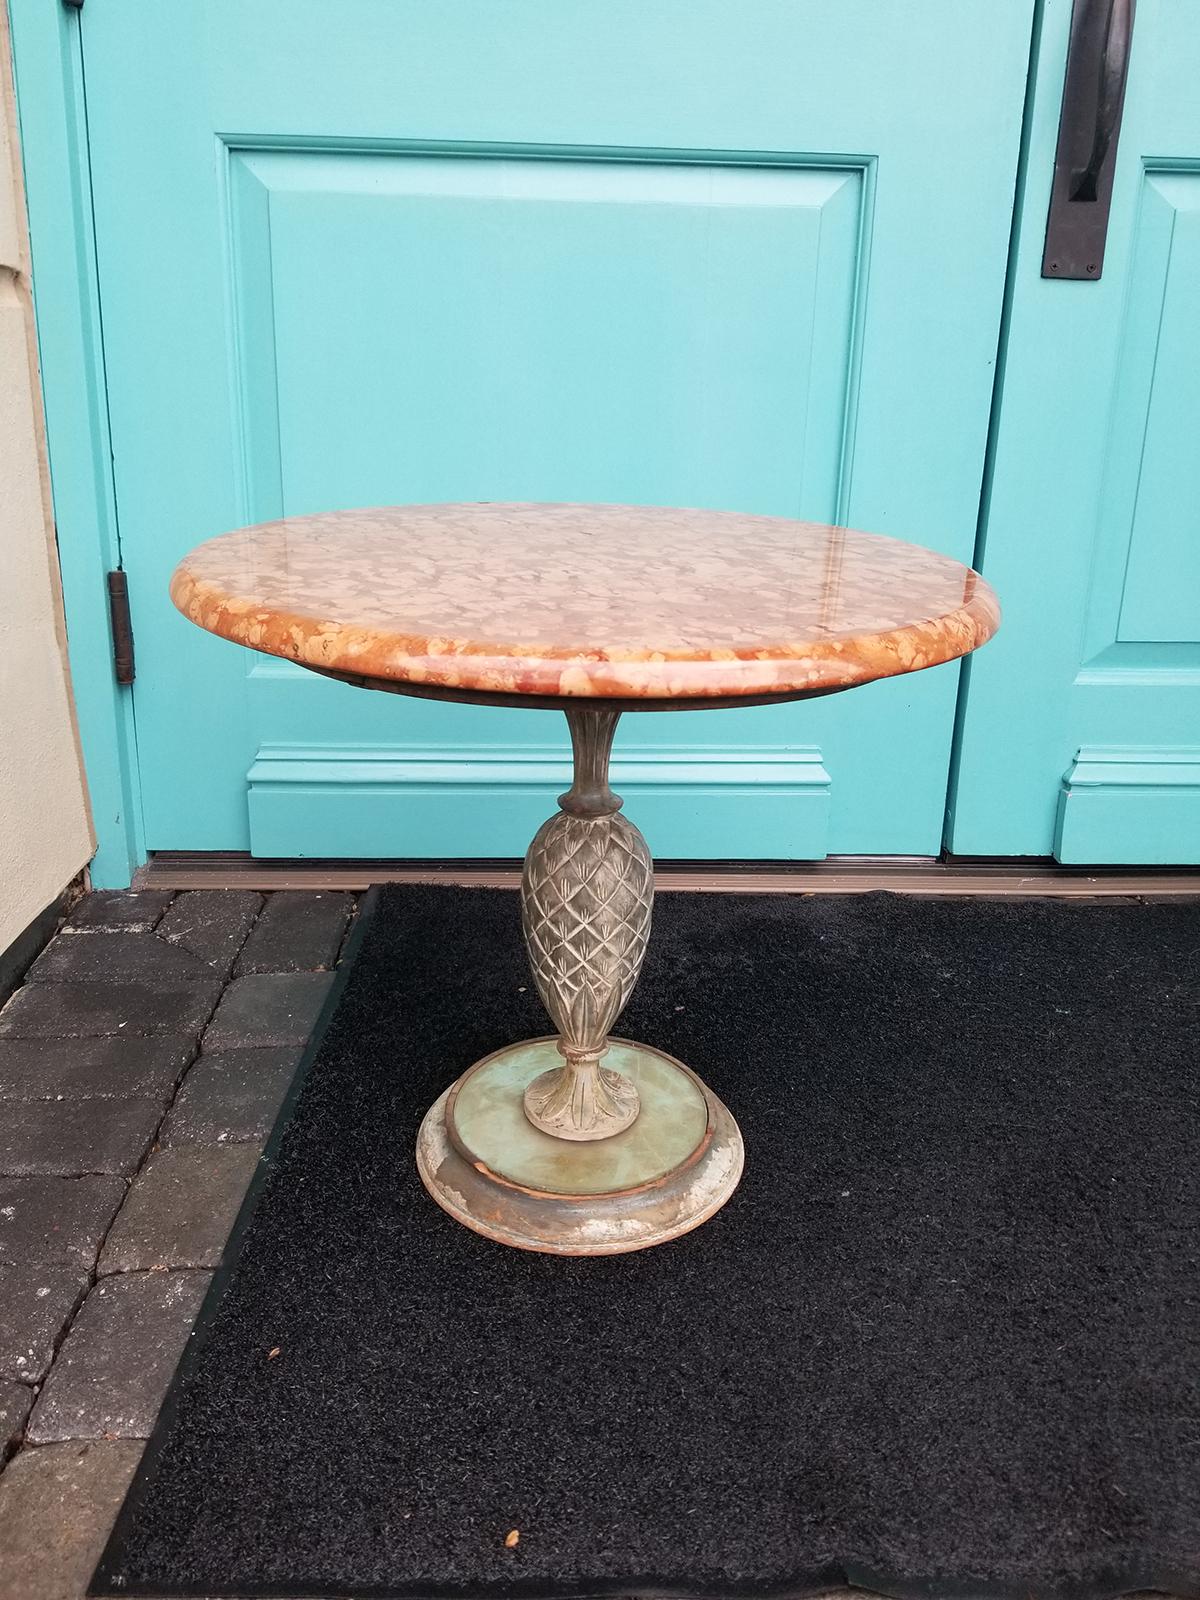 Mid-20th century marble-top table with charming iron pineapple pedestal base.